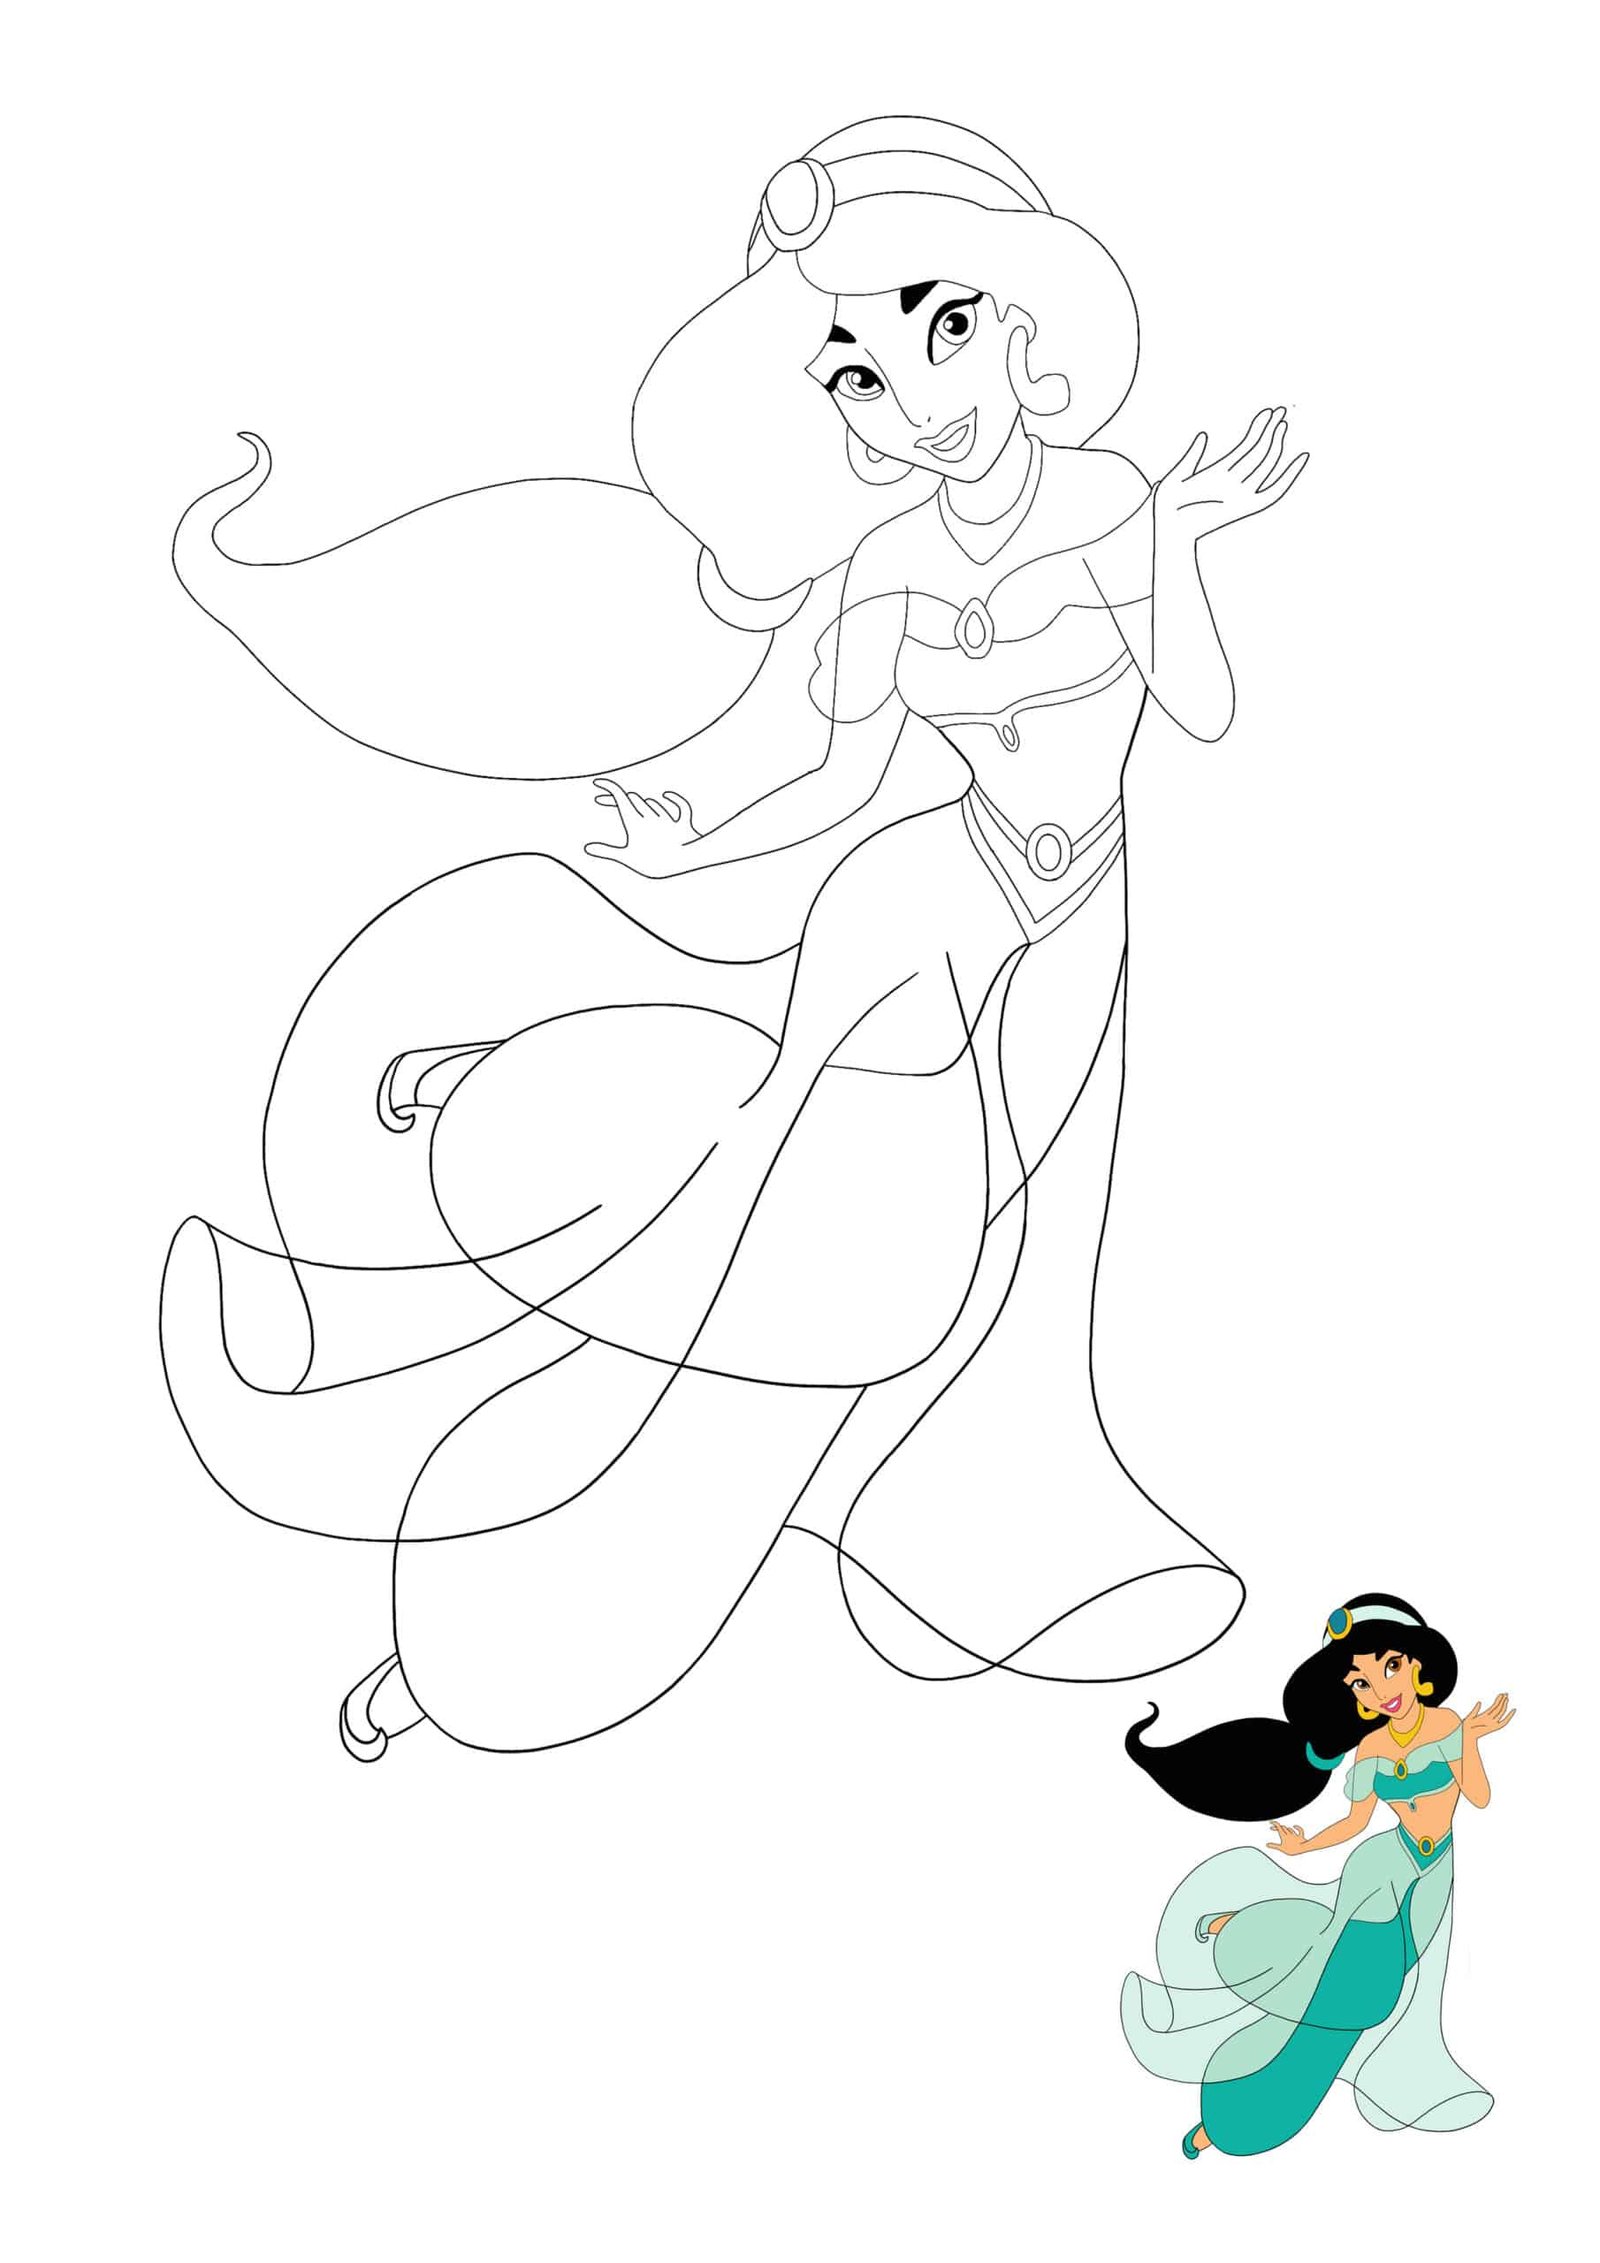 Princess jasmine coloring pages